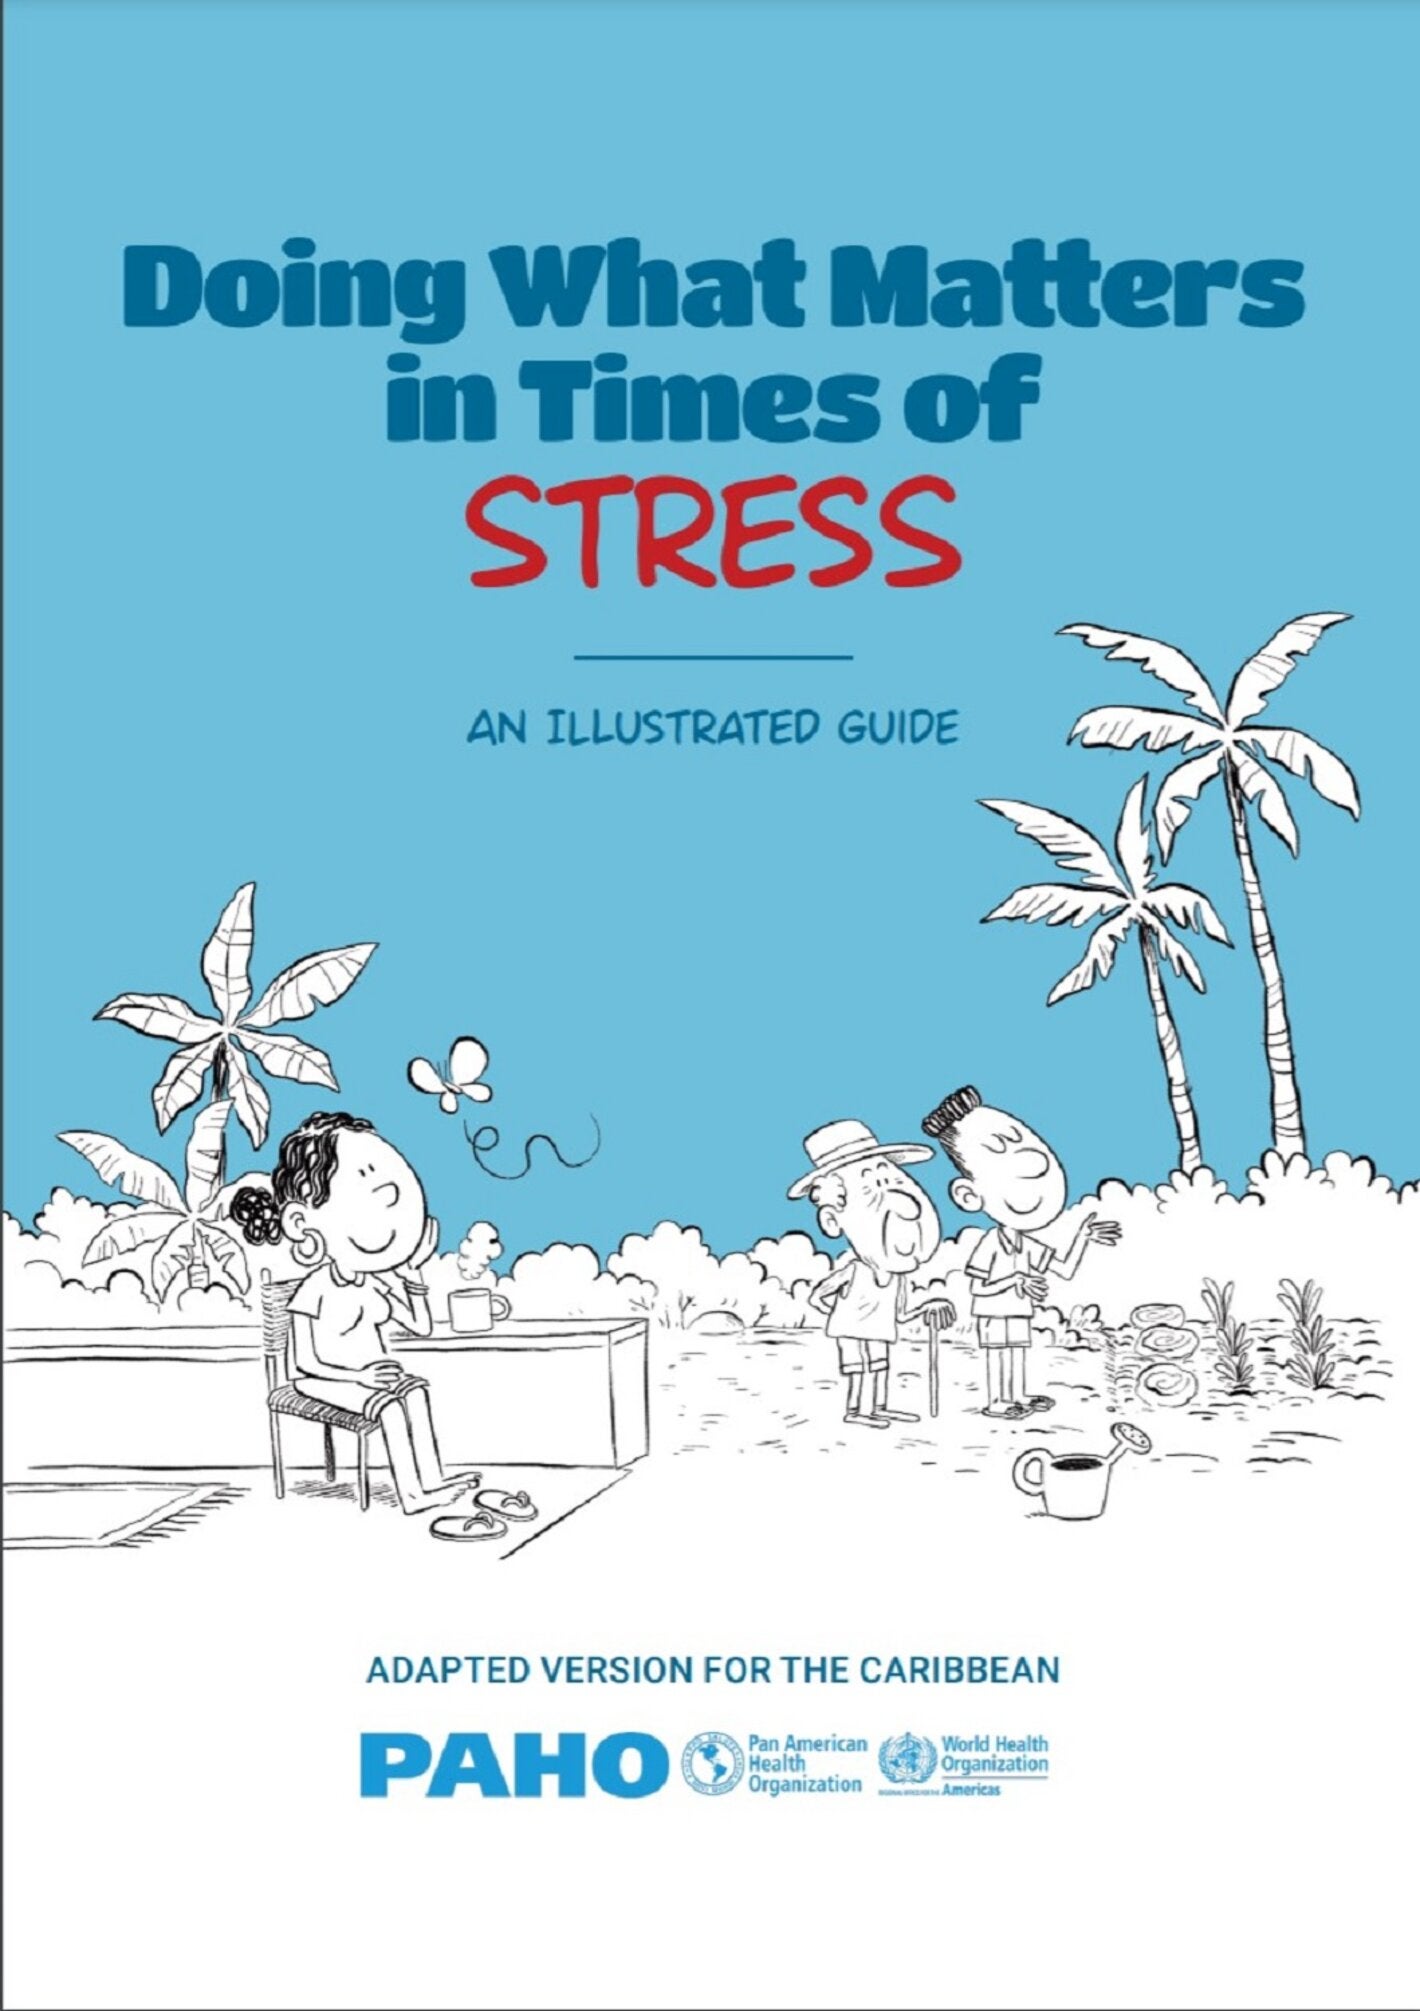 PAHO/CDB Launch Doing What Matters in Times of Stress - Illustrated Guide for the Caribbean